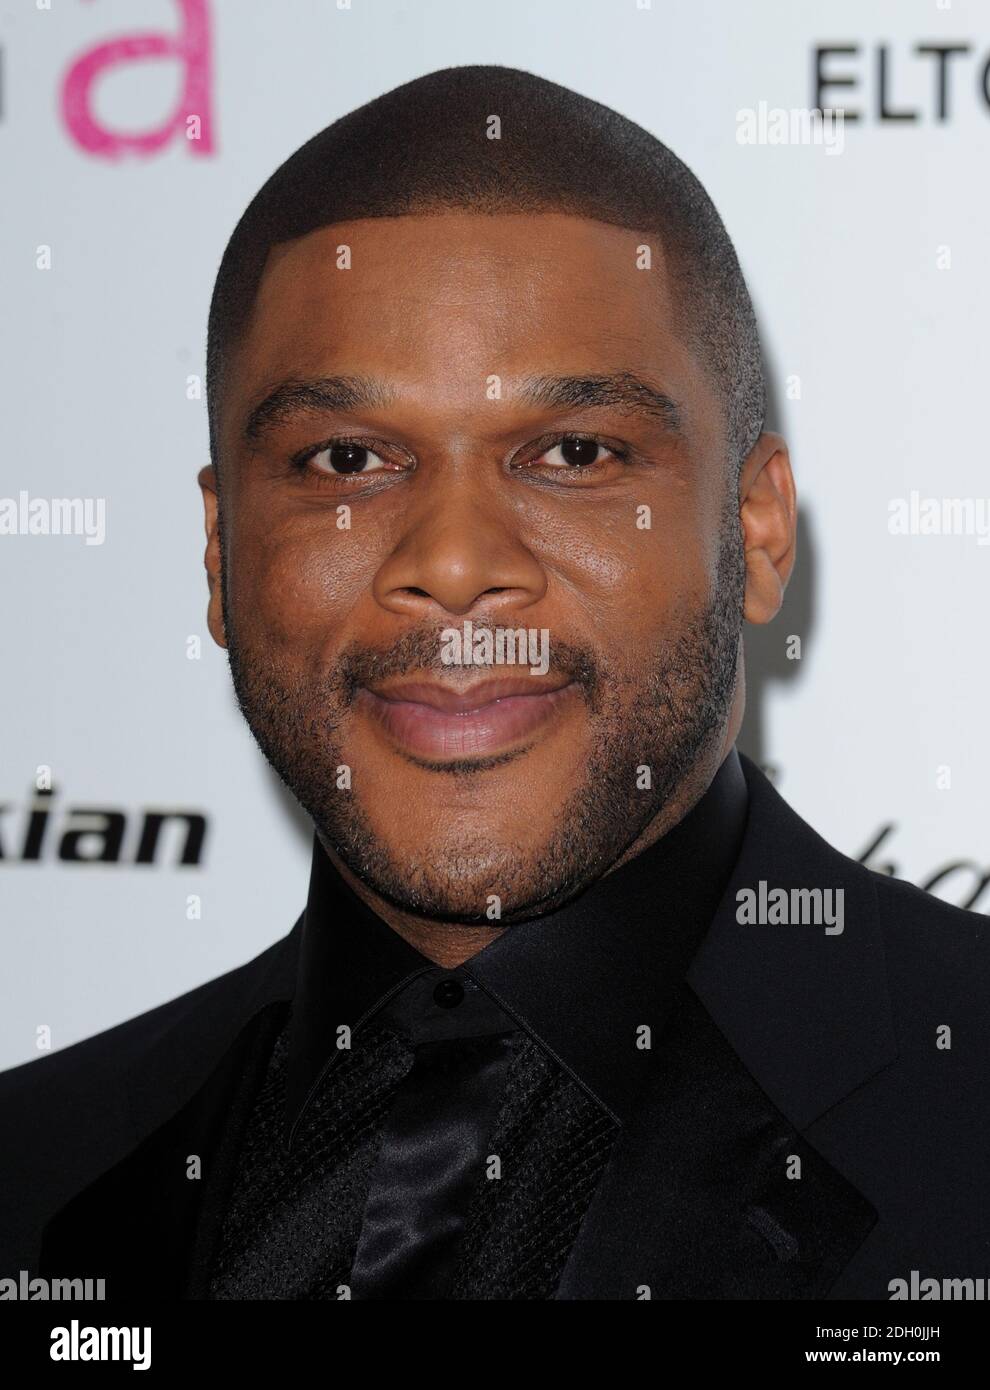 Tyler Perry bei der 17th Annual Elton John AIDS Foundation Oscar Party im Pacific Design Center, West Hollywood. Stockfoto